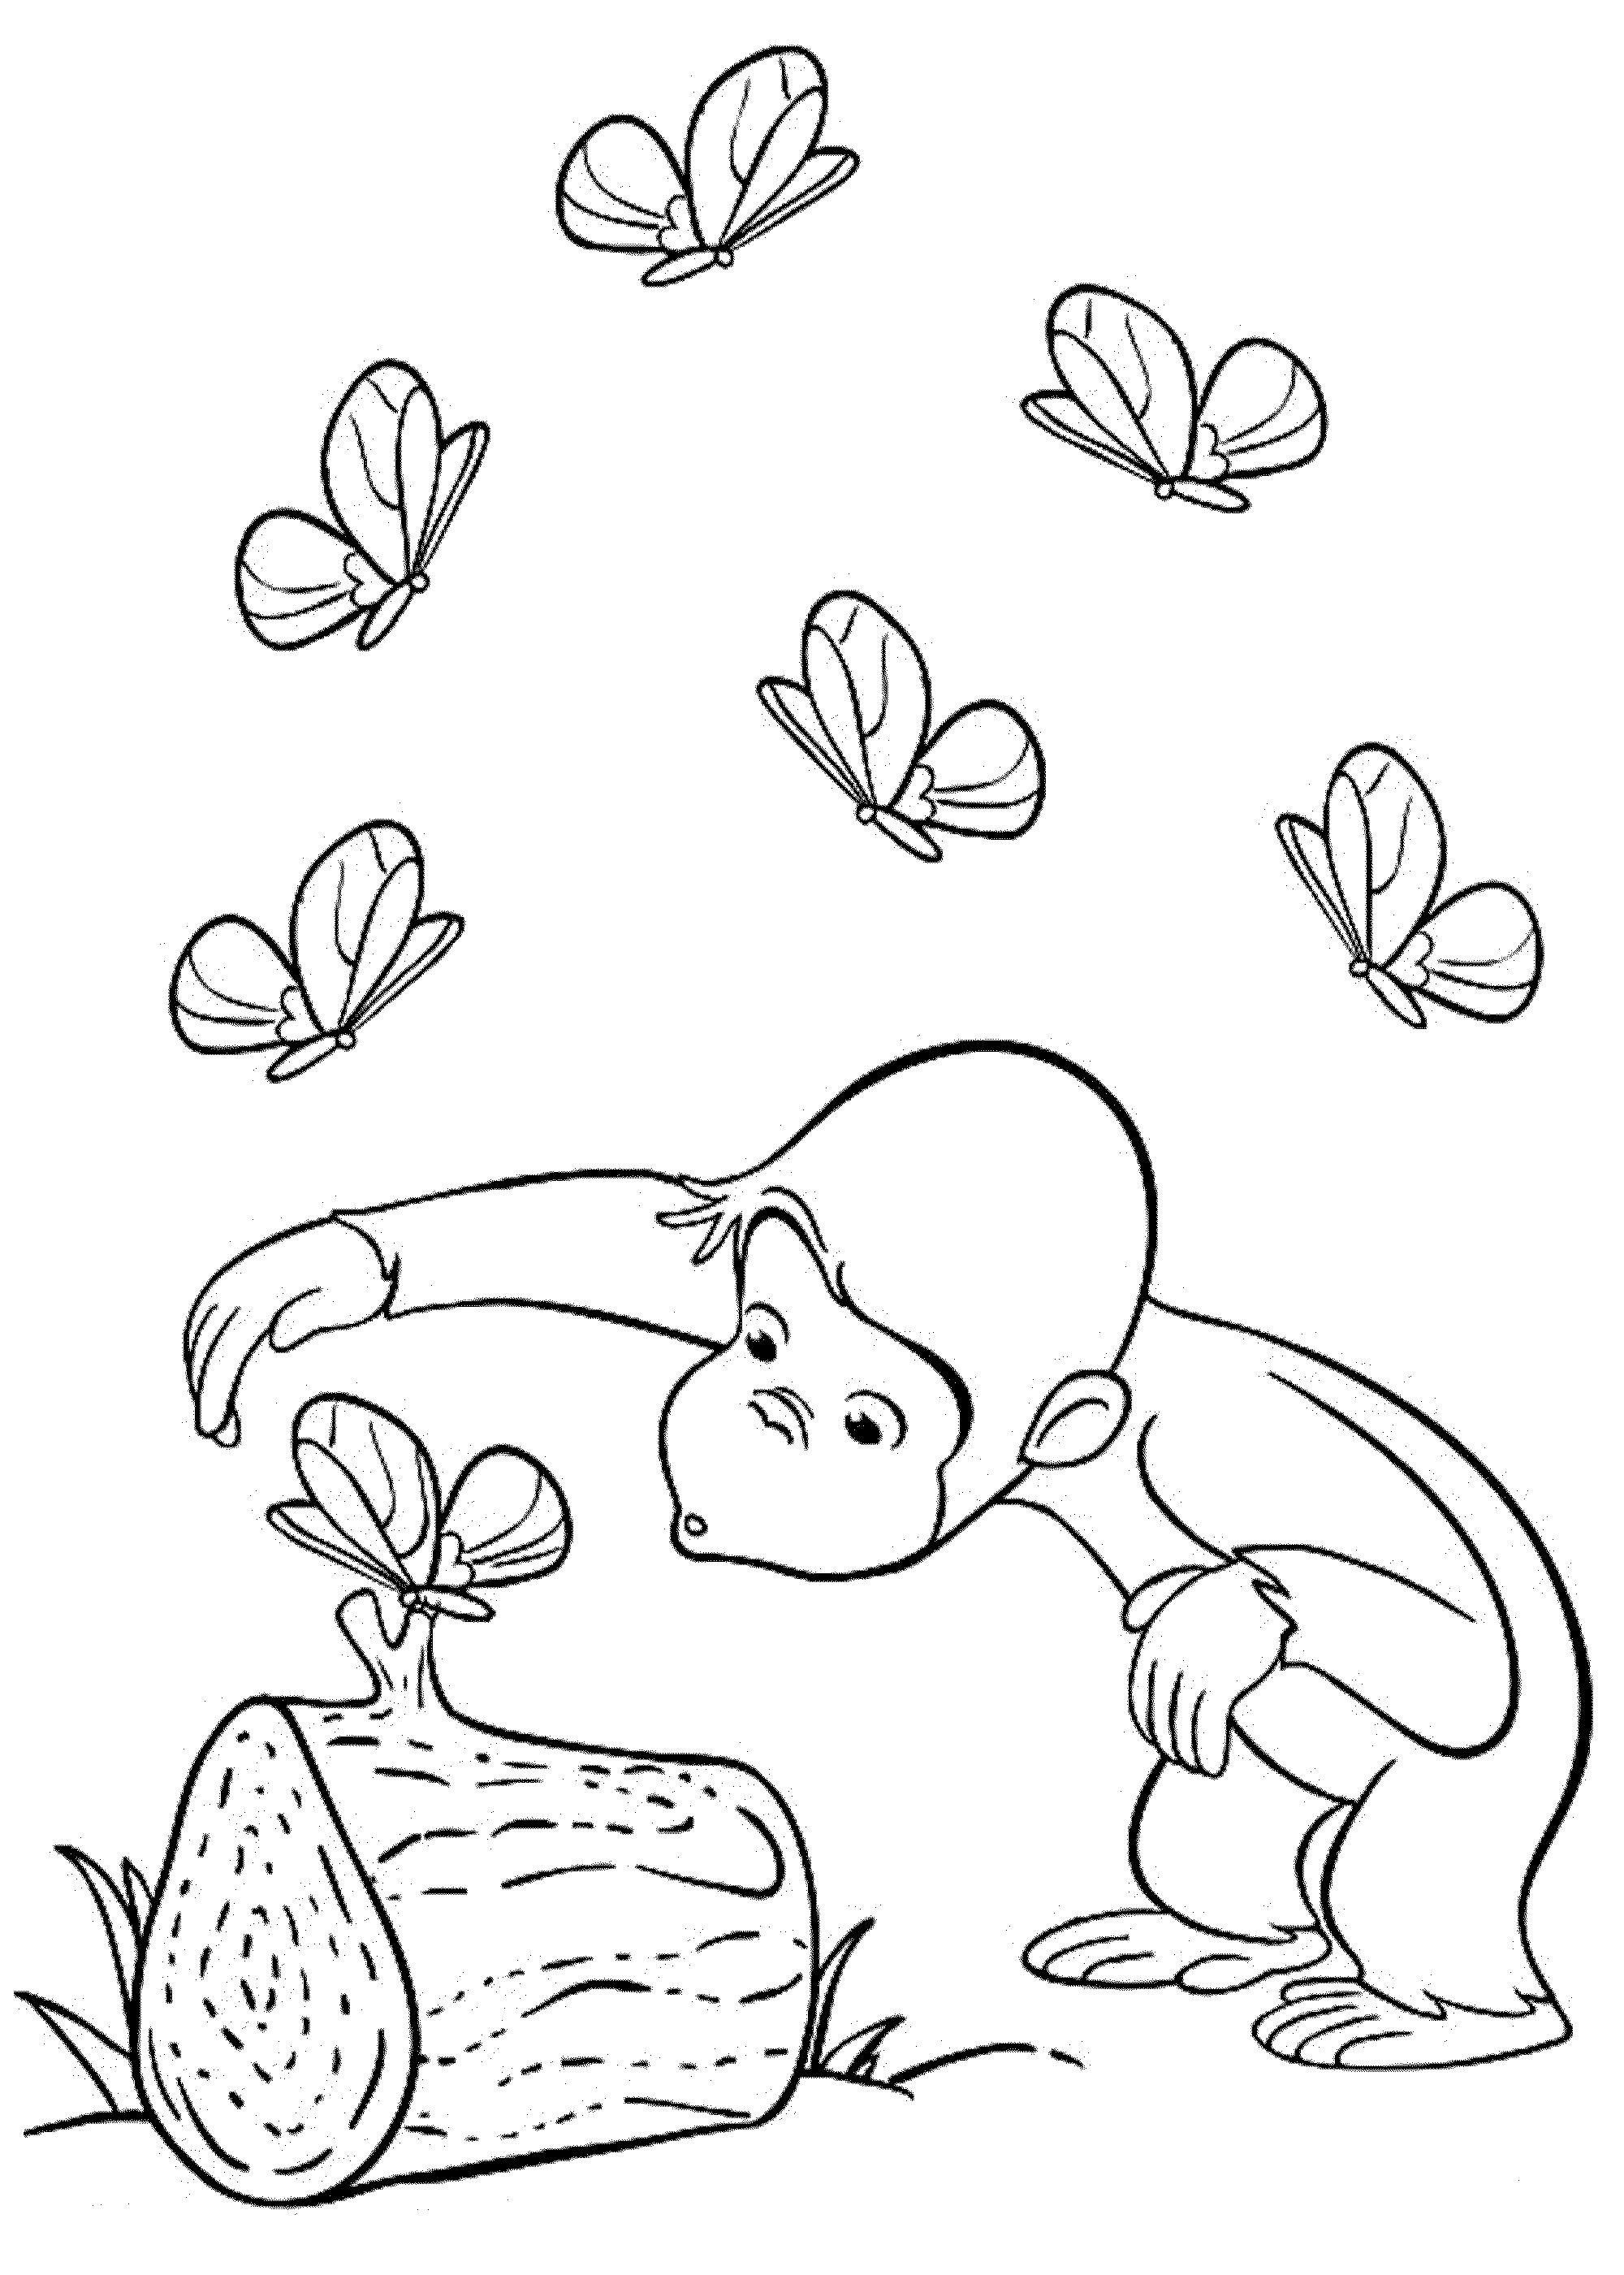 Curious George Coloring Pages Best Coloring Pages For Kids